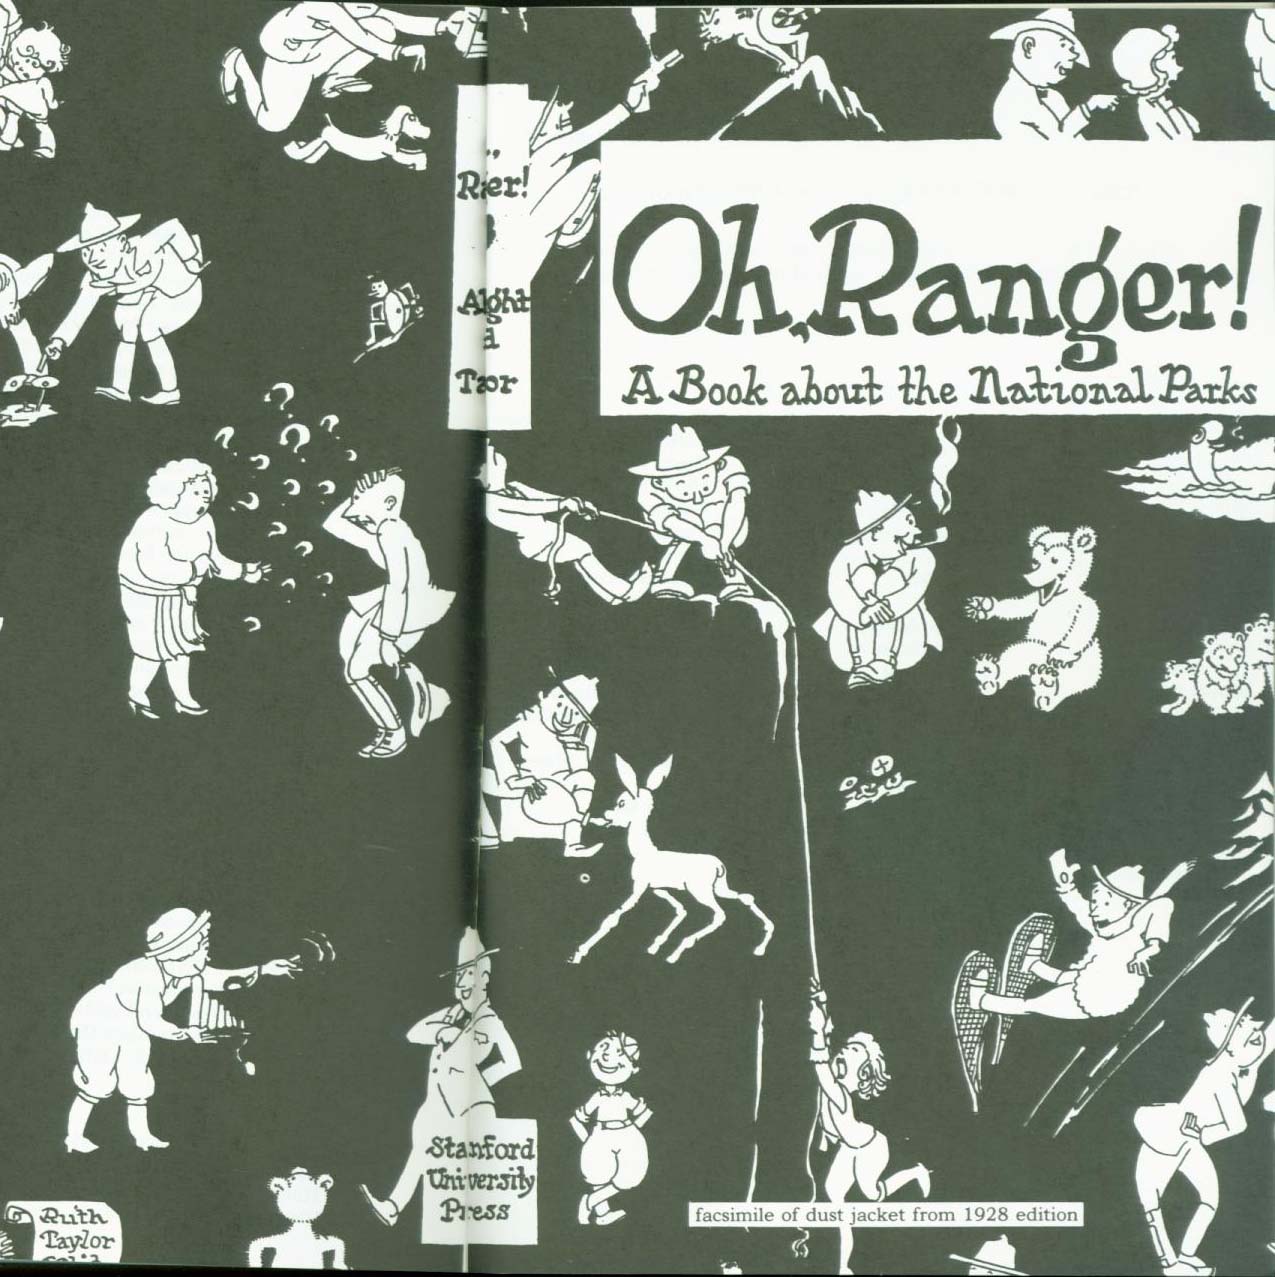 OH, RANGER! a book about the national parks.vist0068h